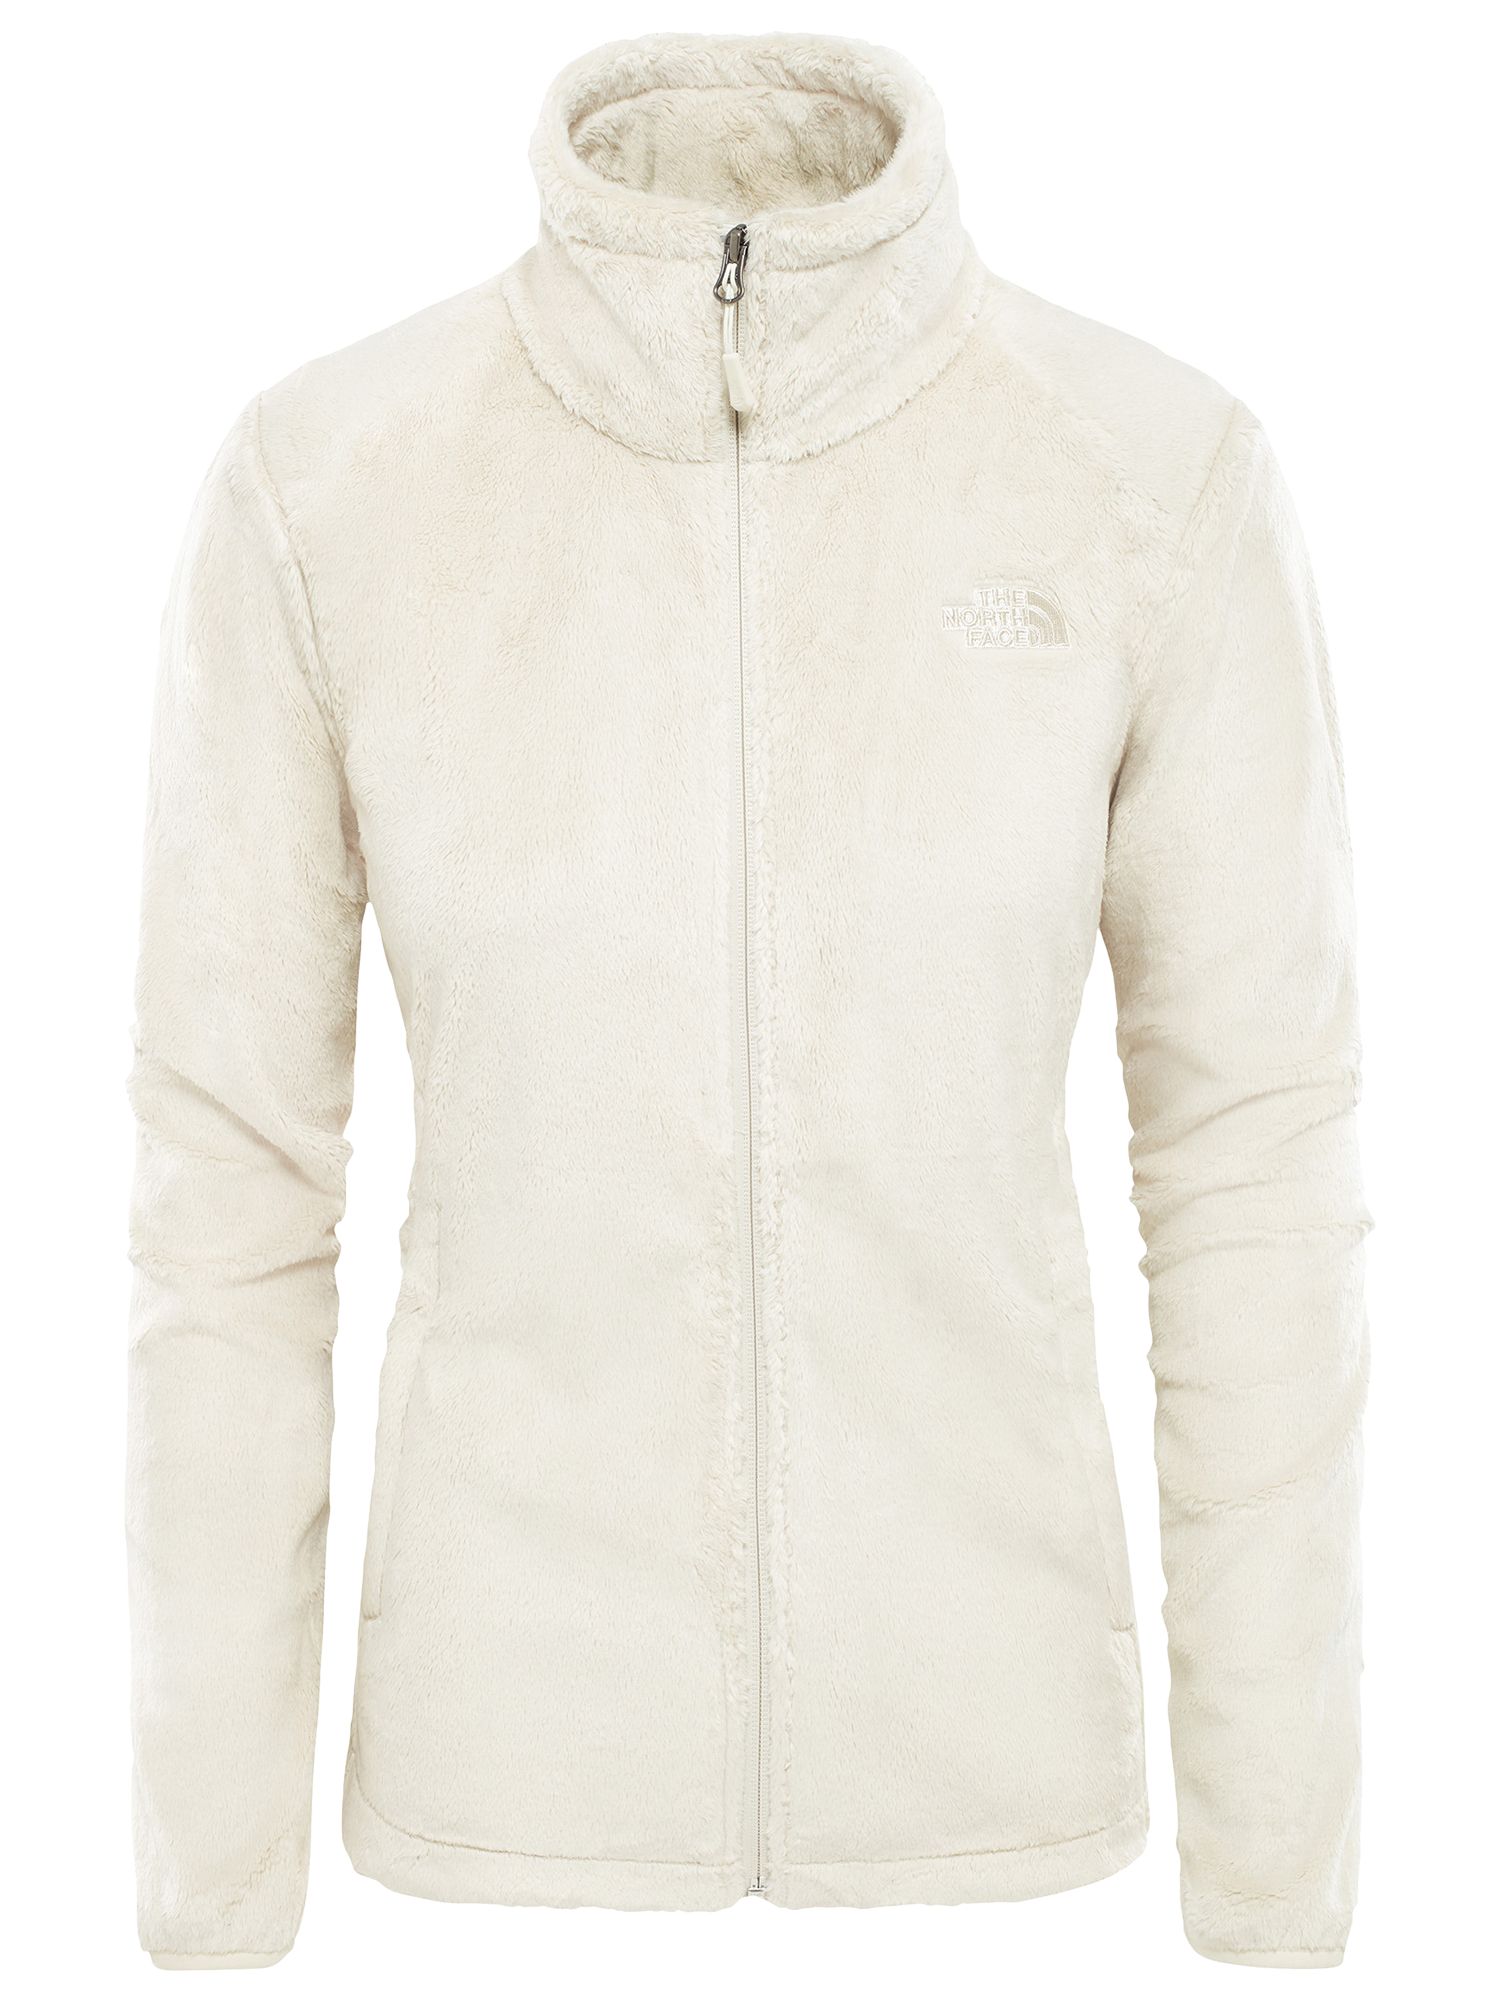 The North Face Osito Women's Fleece Jacket at John Lewis & Partners